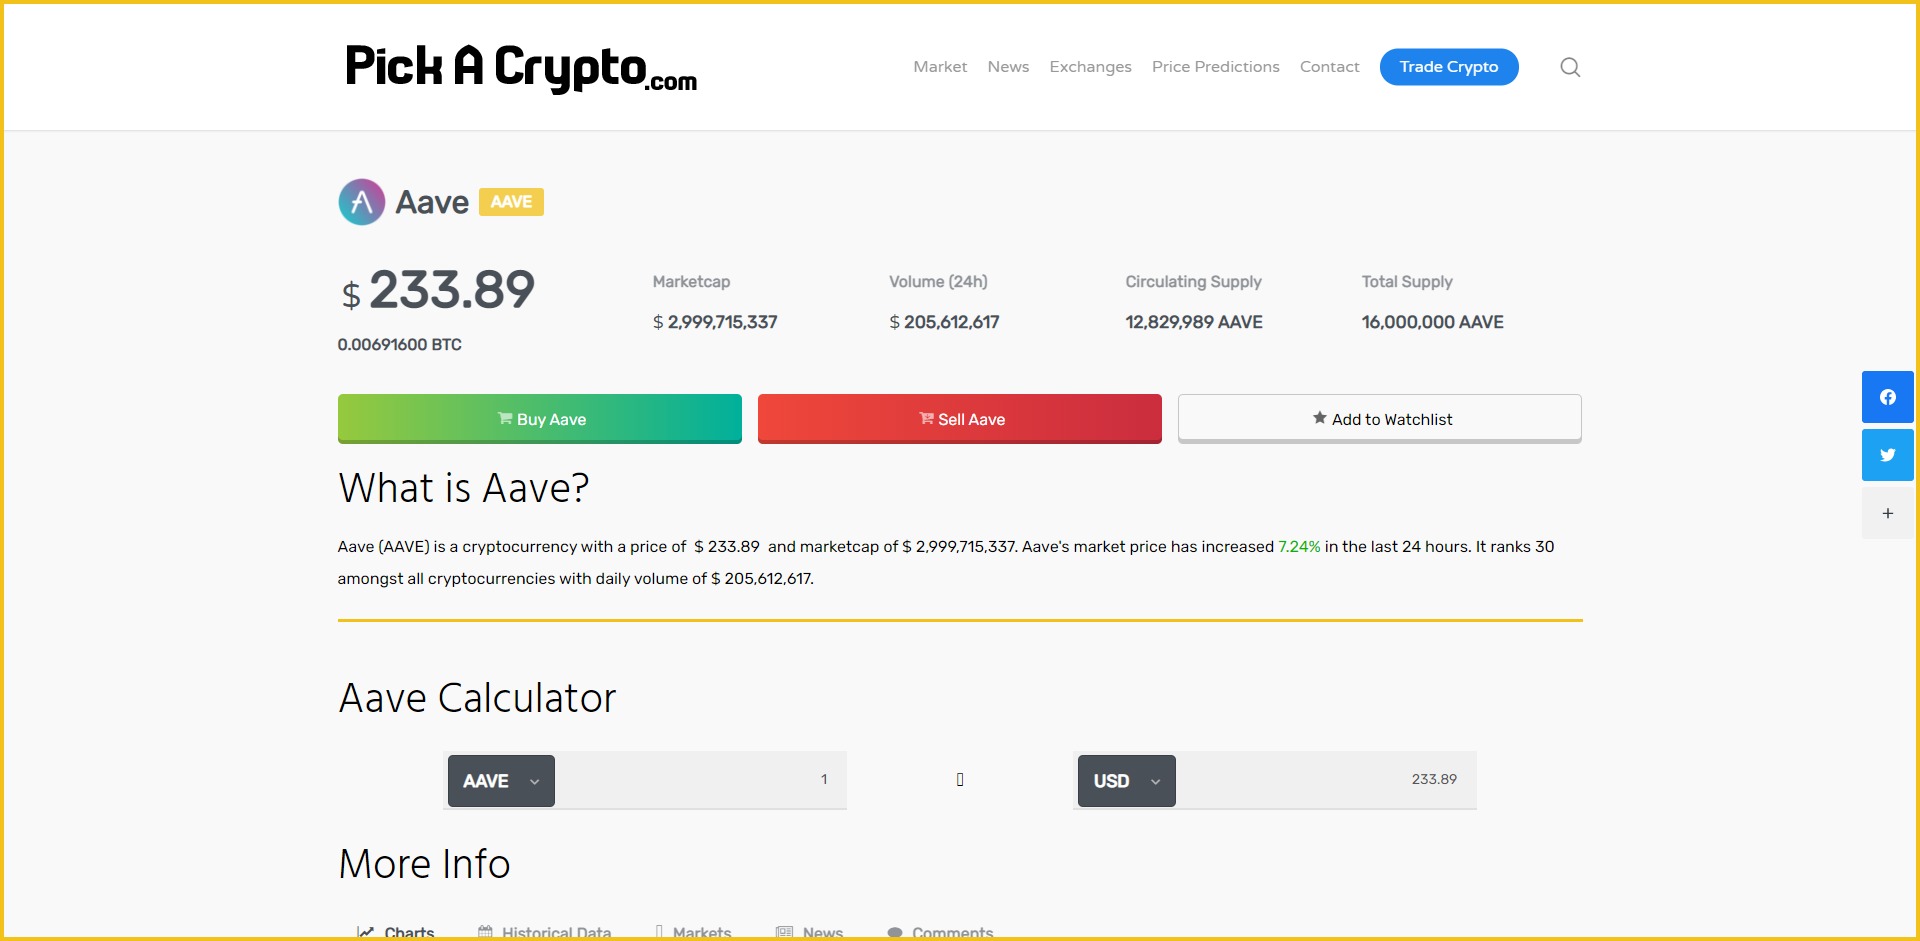 Aave (AAVE) Price Prediction 2021, 2022 + Future AAVE Price